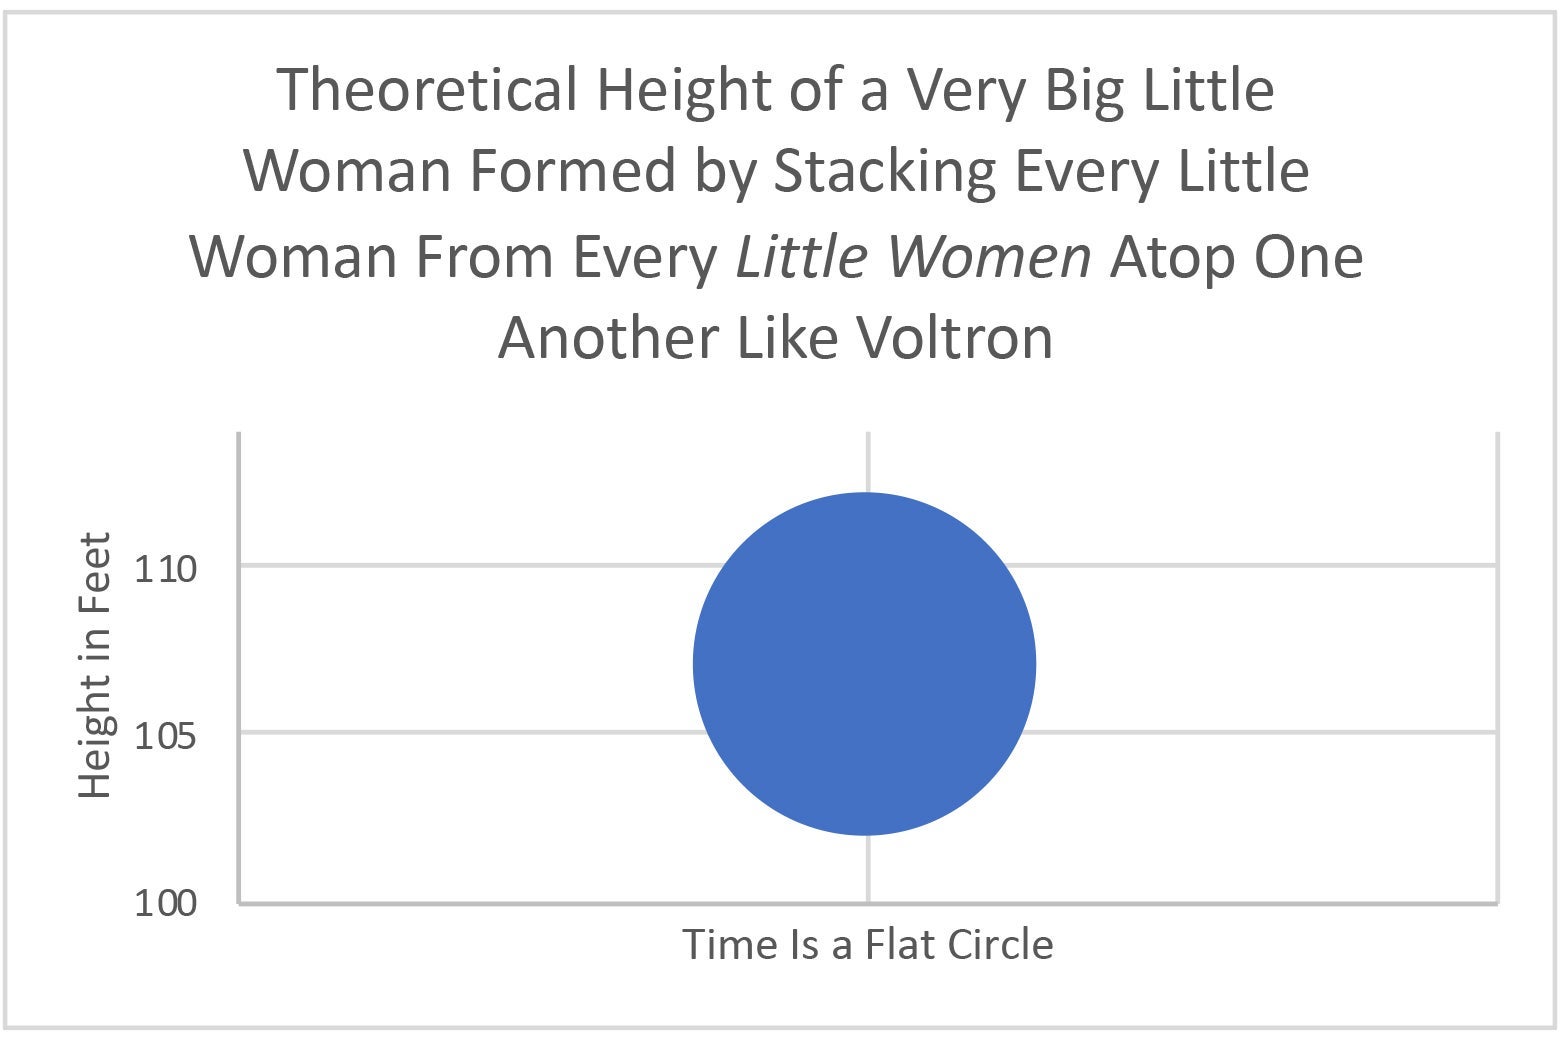 A graph showing one data point: All the actresses from Little Women would be more than 107 feet tall if they stood atop each others heads.